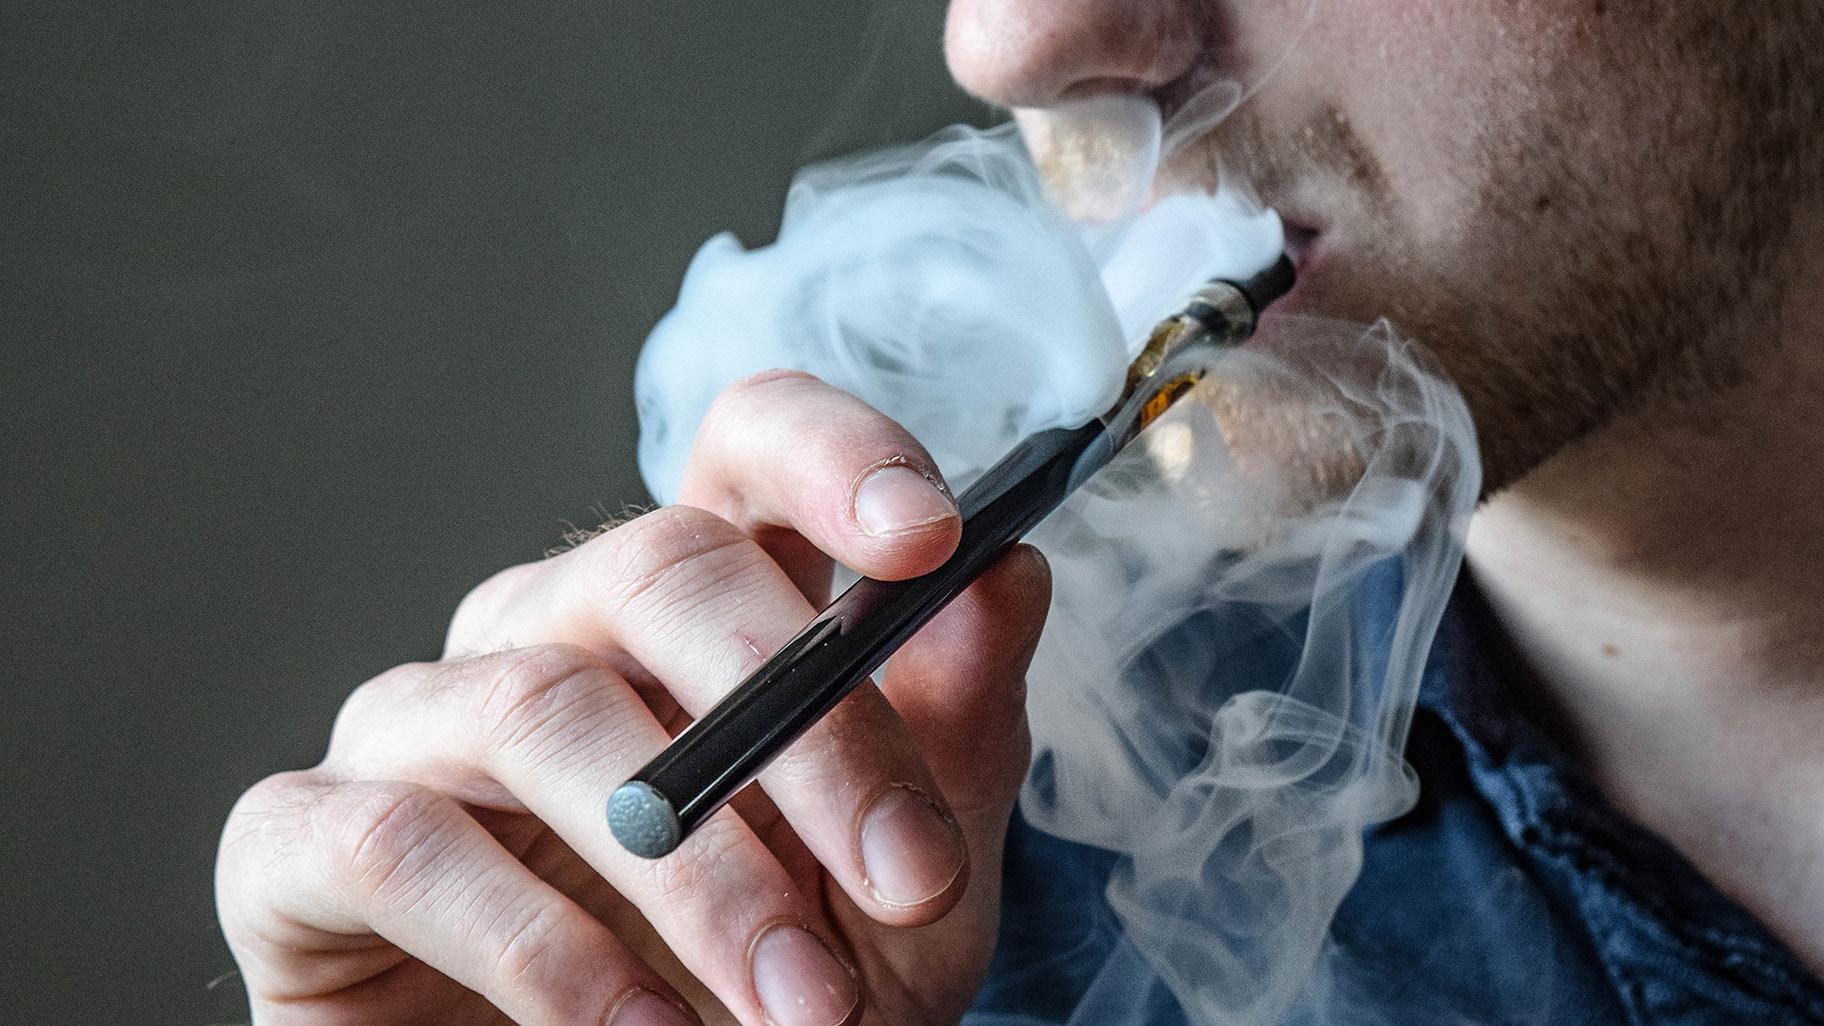 WE ALREADY HAVE THE SOLUTION TO TACKLE UNDER-AGE VAPING… AND IT’S NOT FLAVOUR BANS